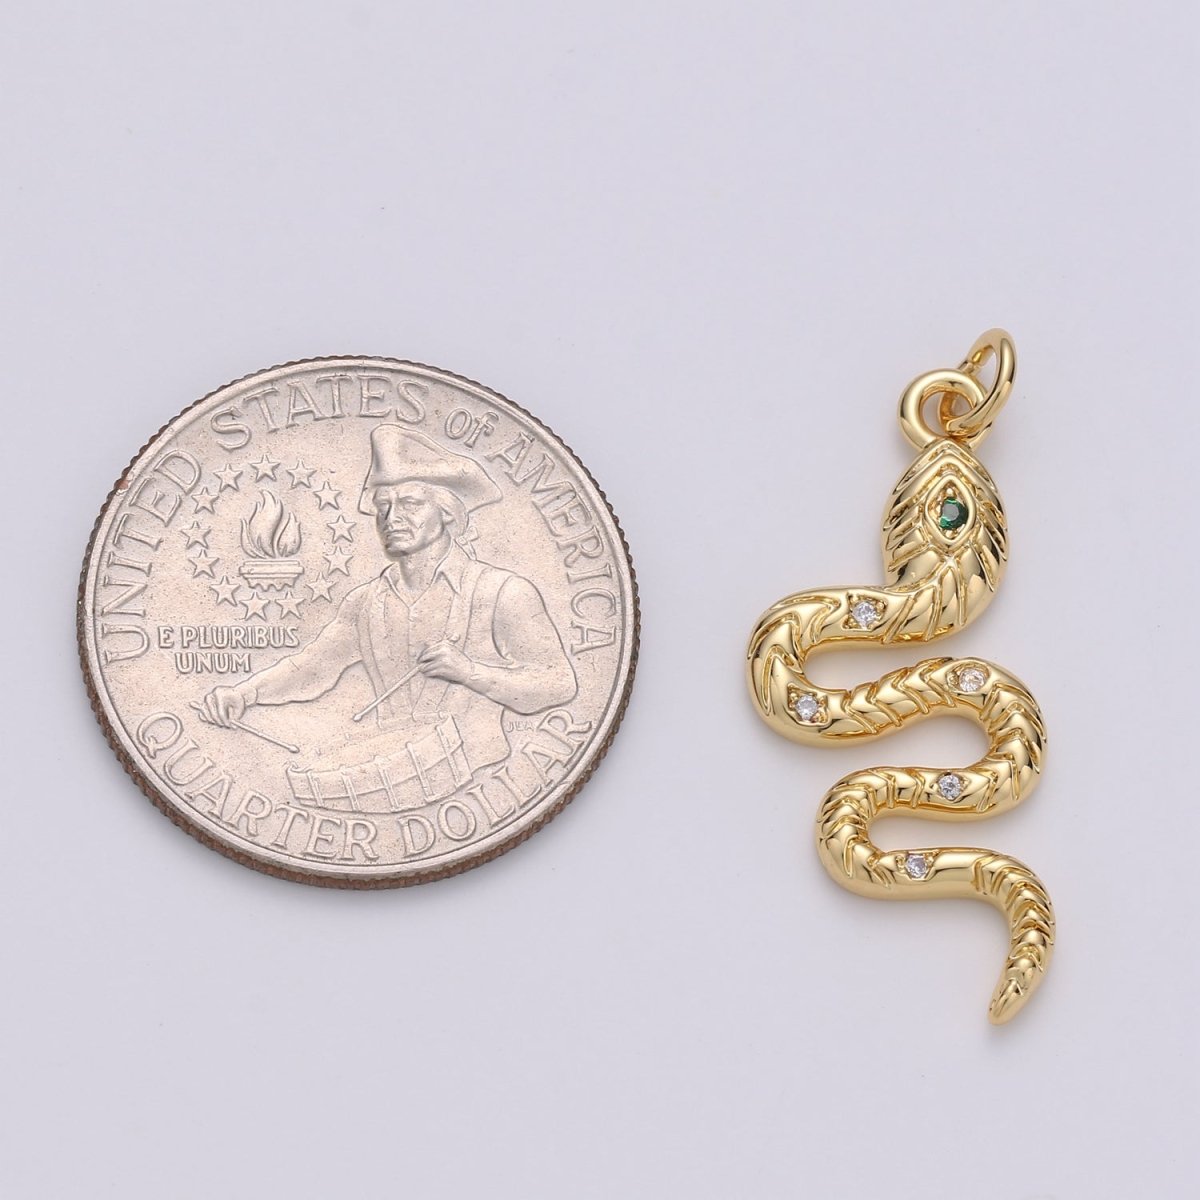 Gold Snake Charm, 24K Gold Filled Snake Pendant for Necklace Making, 35x14mm, Green Serpent Micro CZ Pave Charm, Jewelry Finding,E-115 - DLUXCA